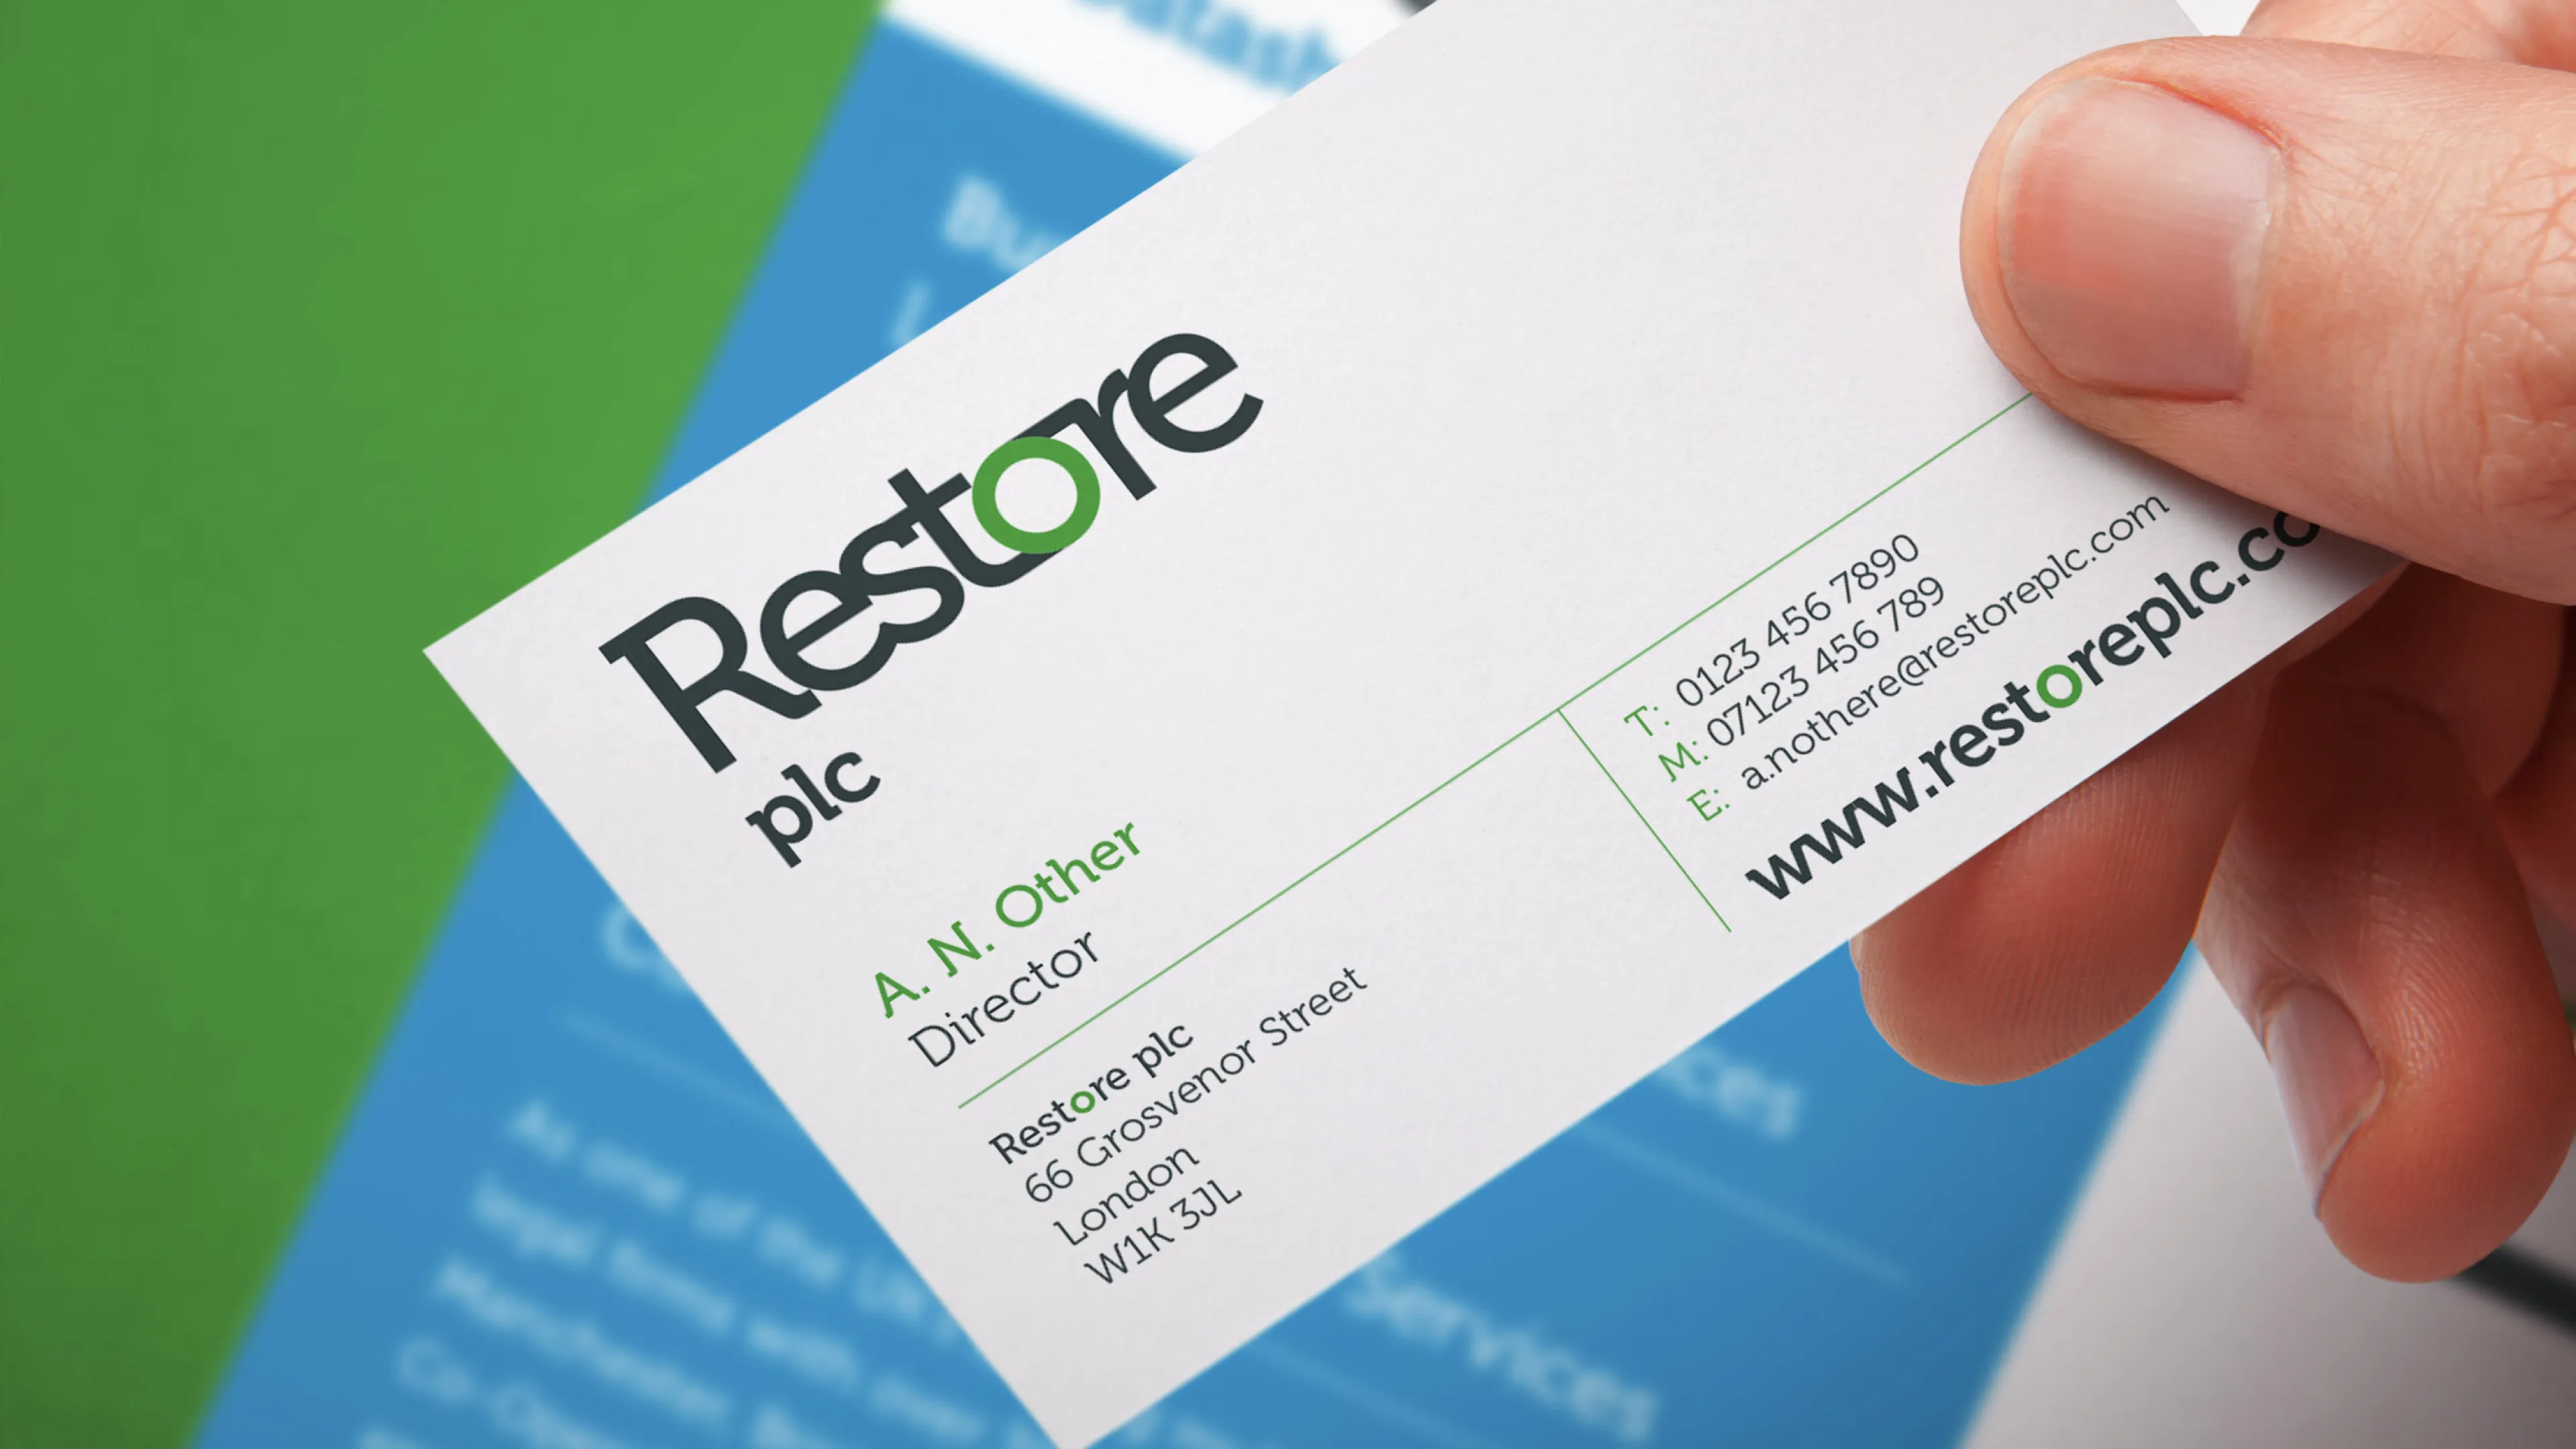 Image of new business cards with new branding